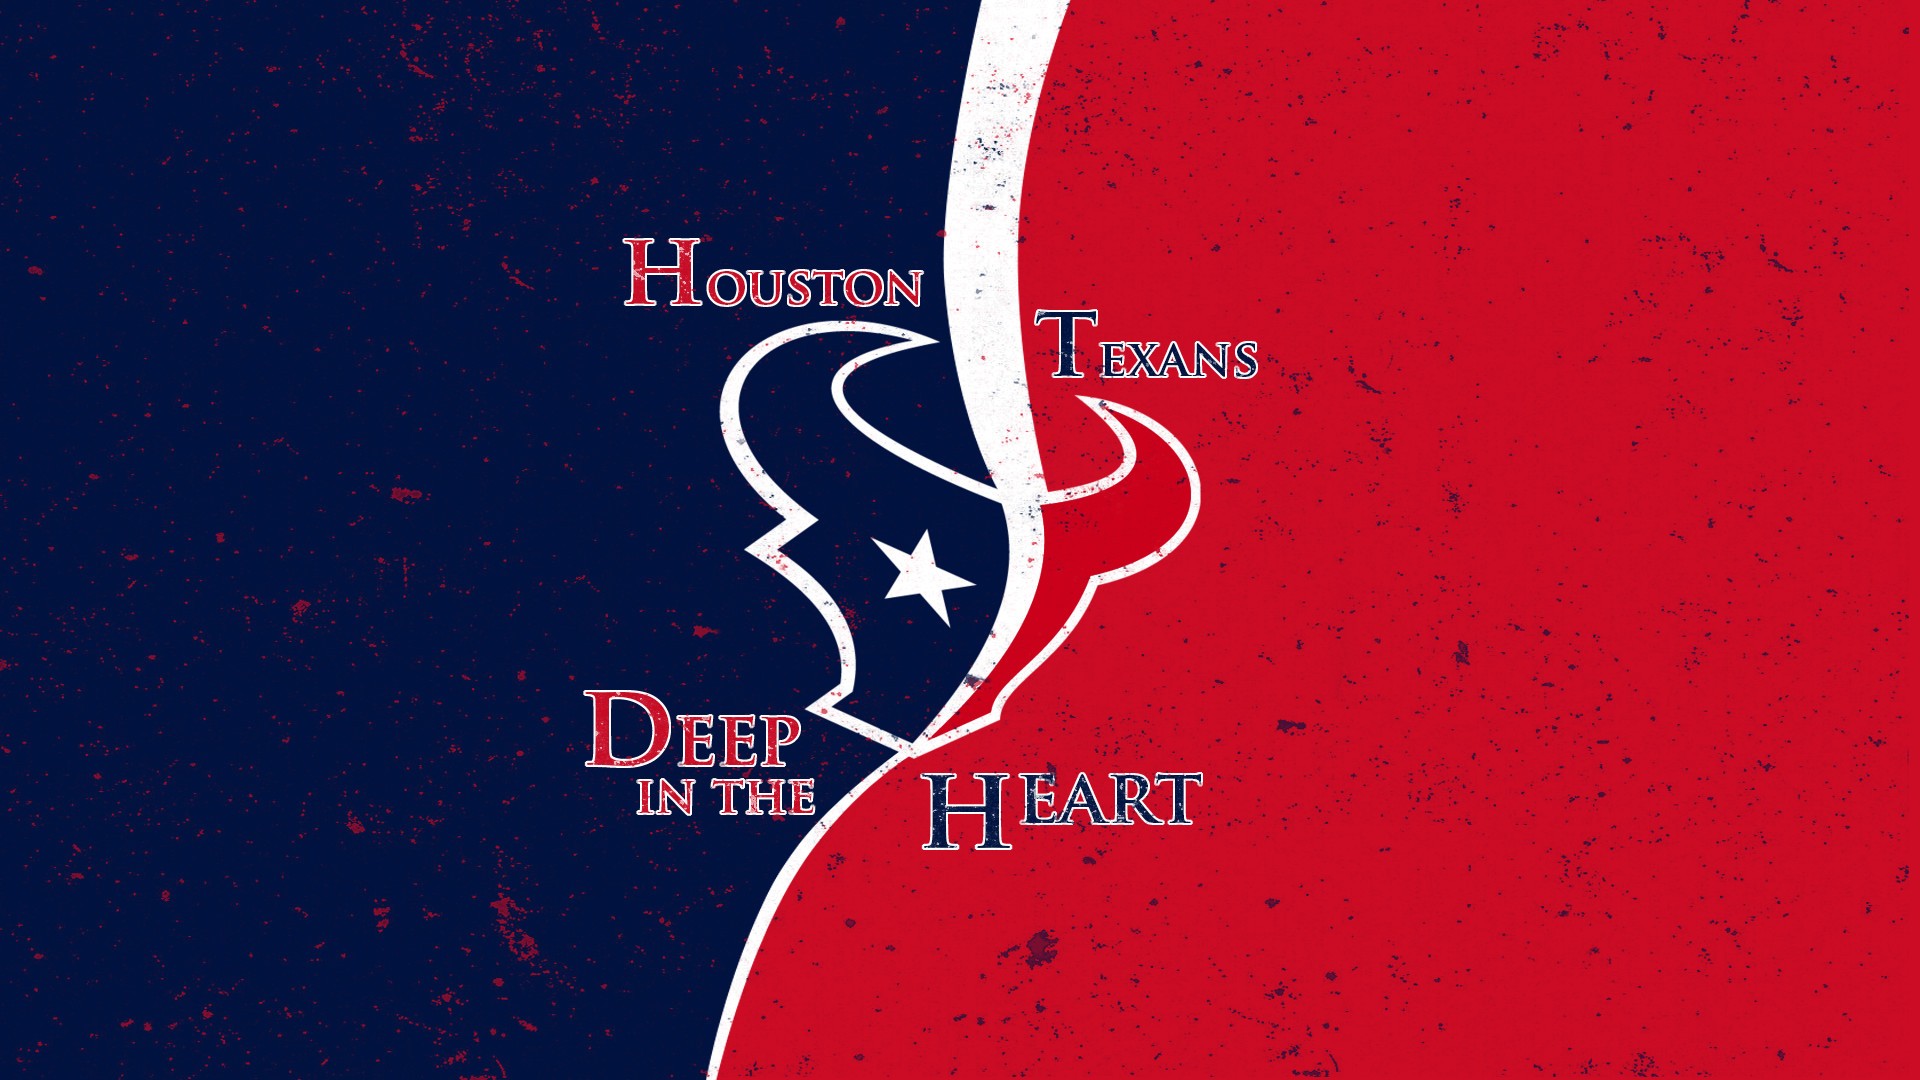 Wallpapers Houston Texans NFL With Resolution 1920X1080 pixel. You can make this wallpaper for your Mac or Windows Desktop Background, iPhone, Android or Tablet and another Smartphone device for free